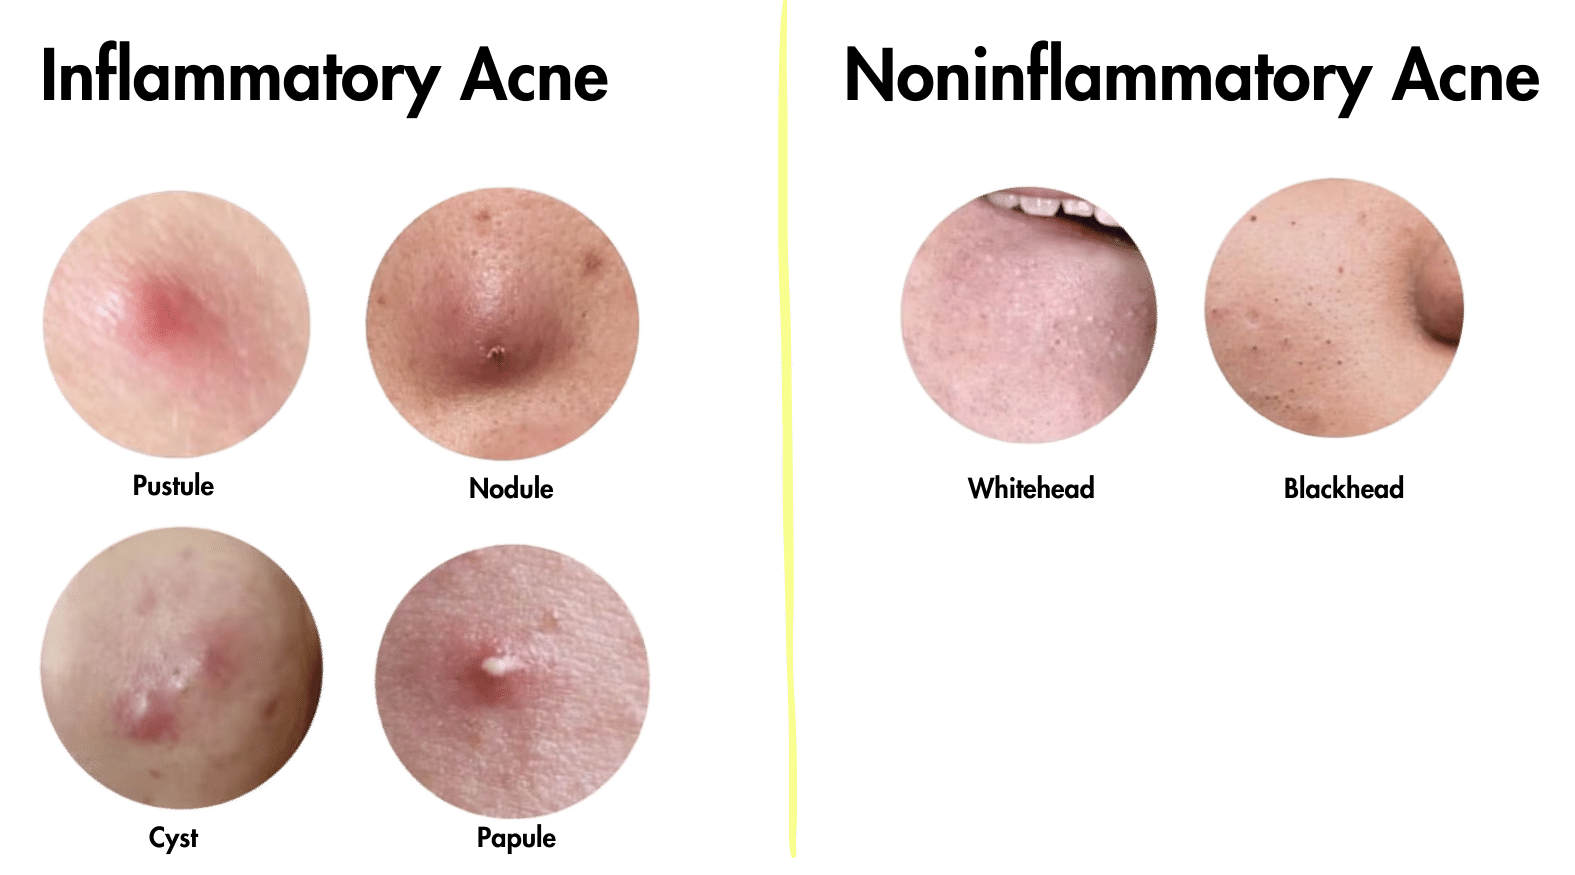 What age is acne the worst? The difference between inflammatory and noninflammatory acne.